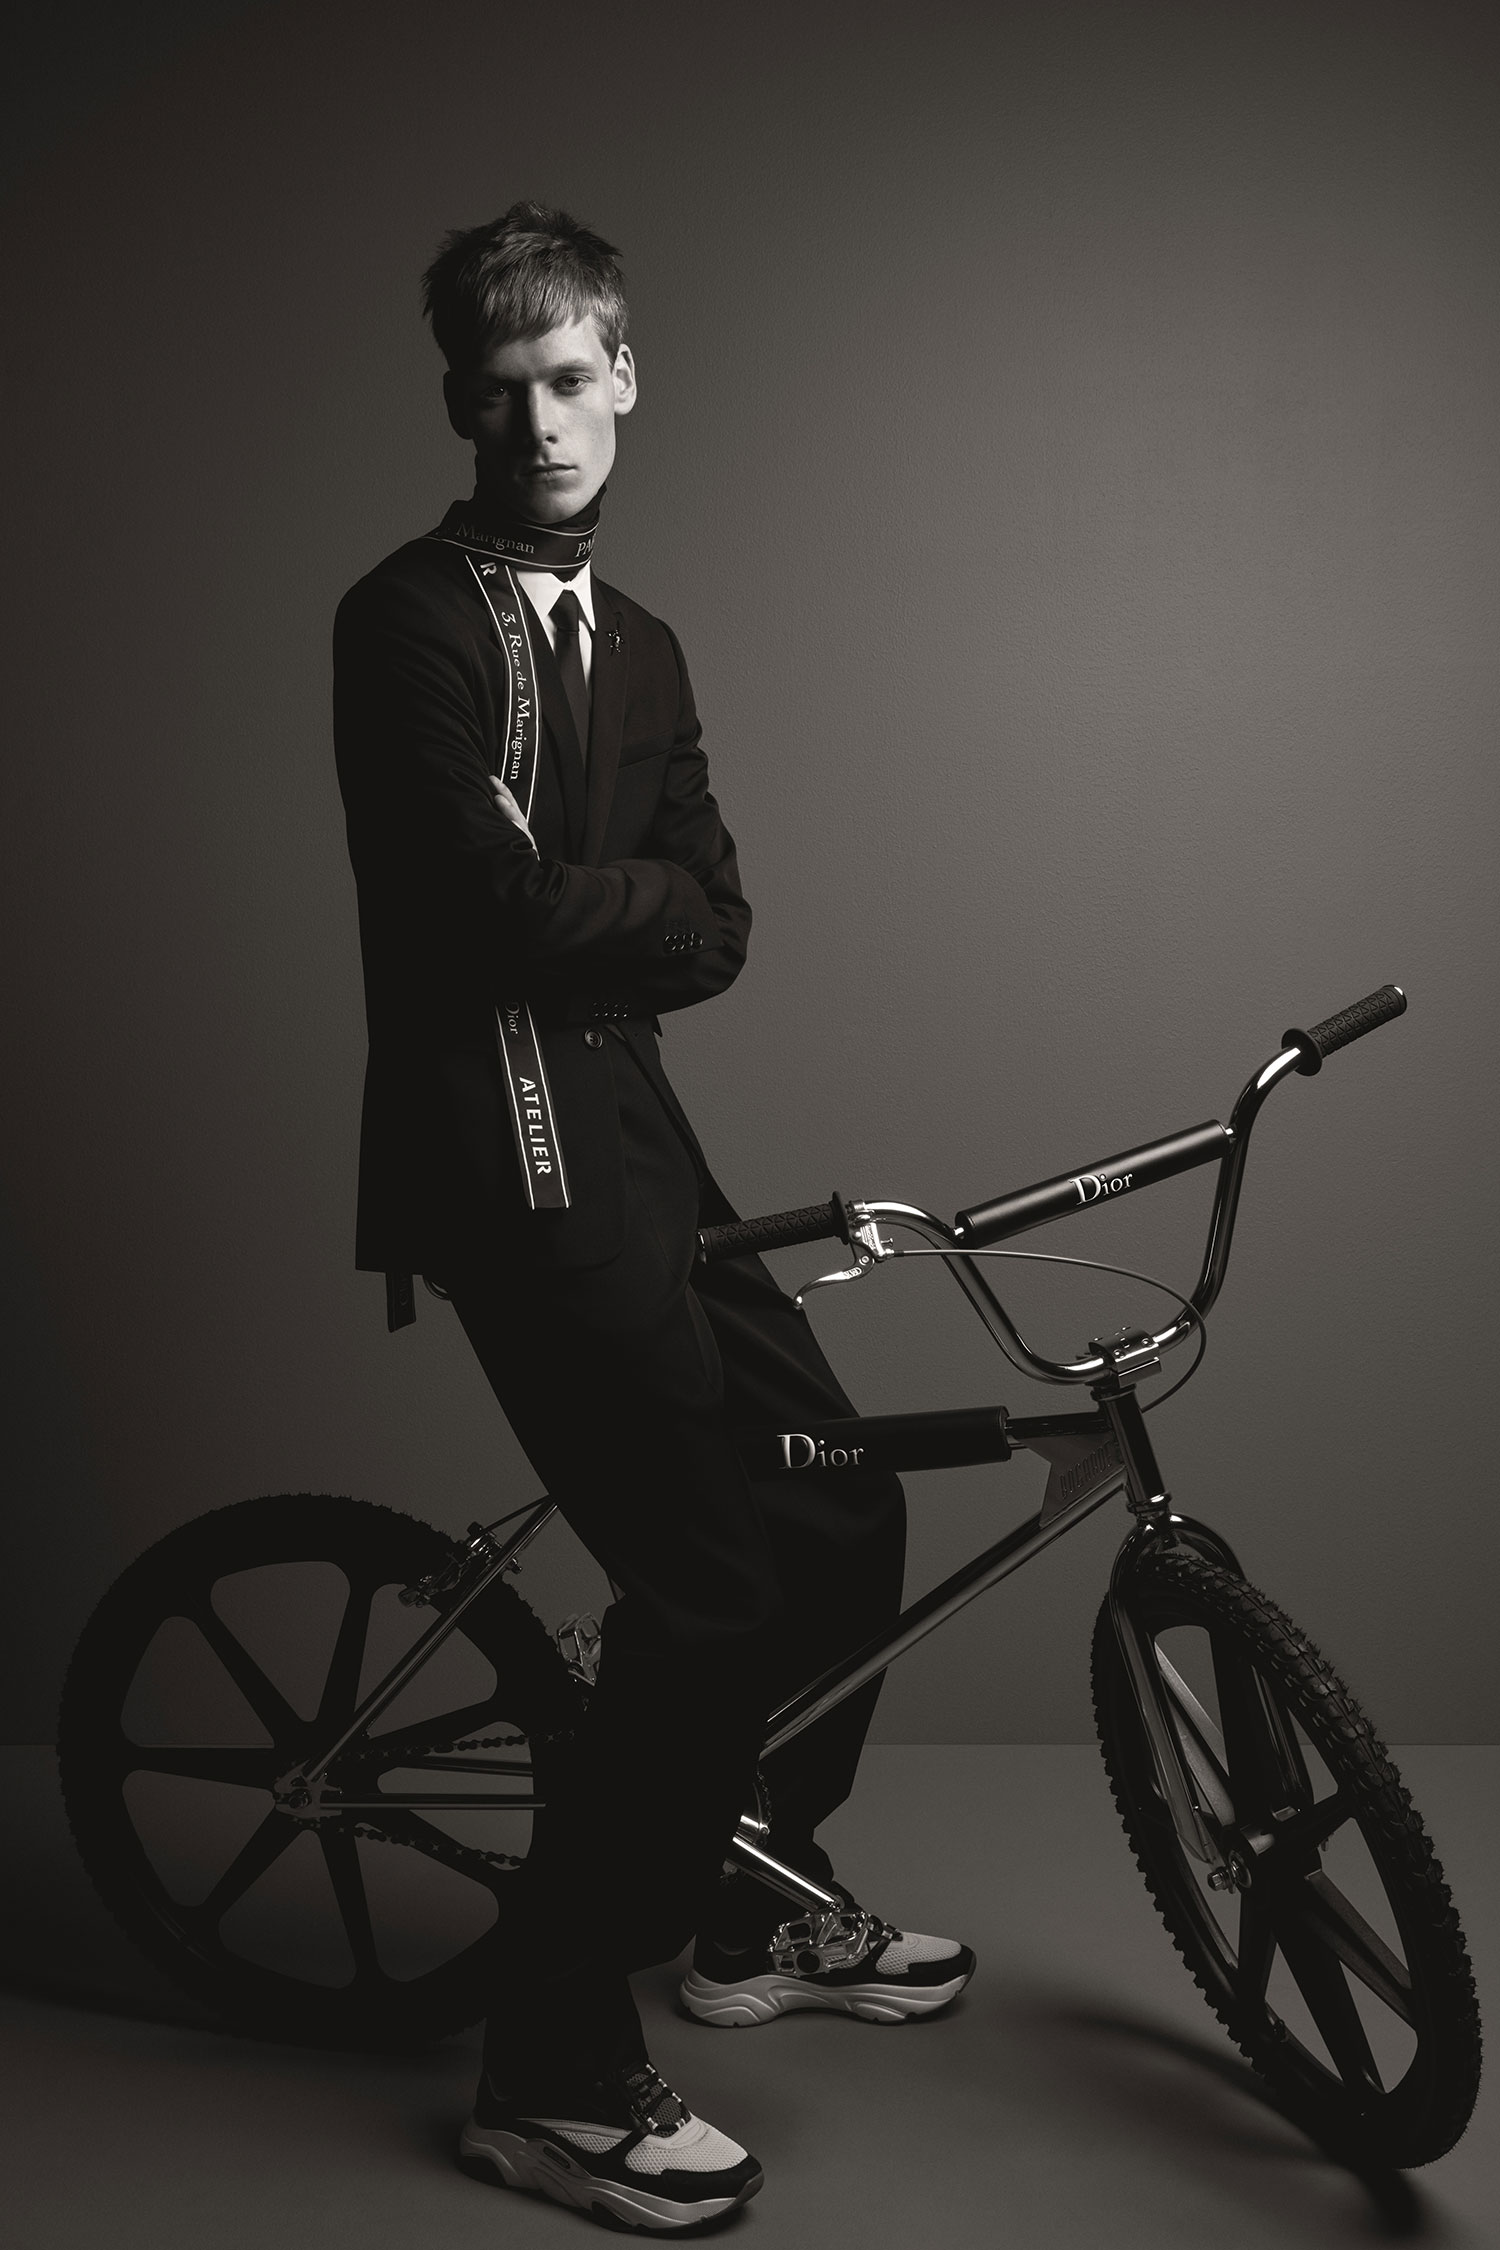 The first official images of Dior Homme's BMX bike were shot by Patrick Demarchelier